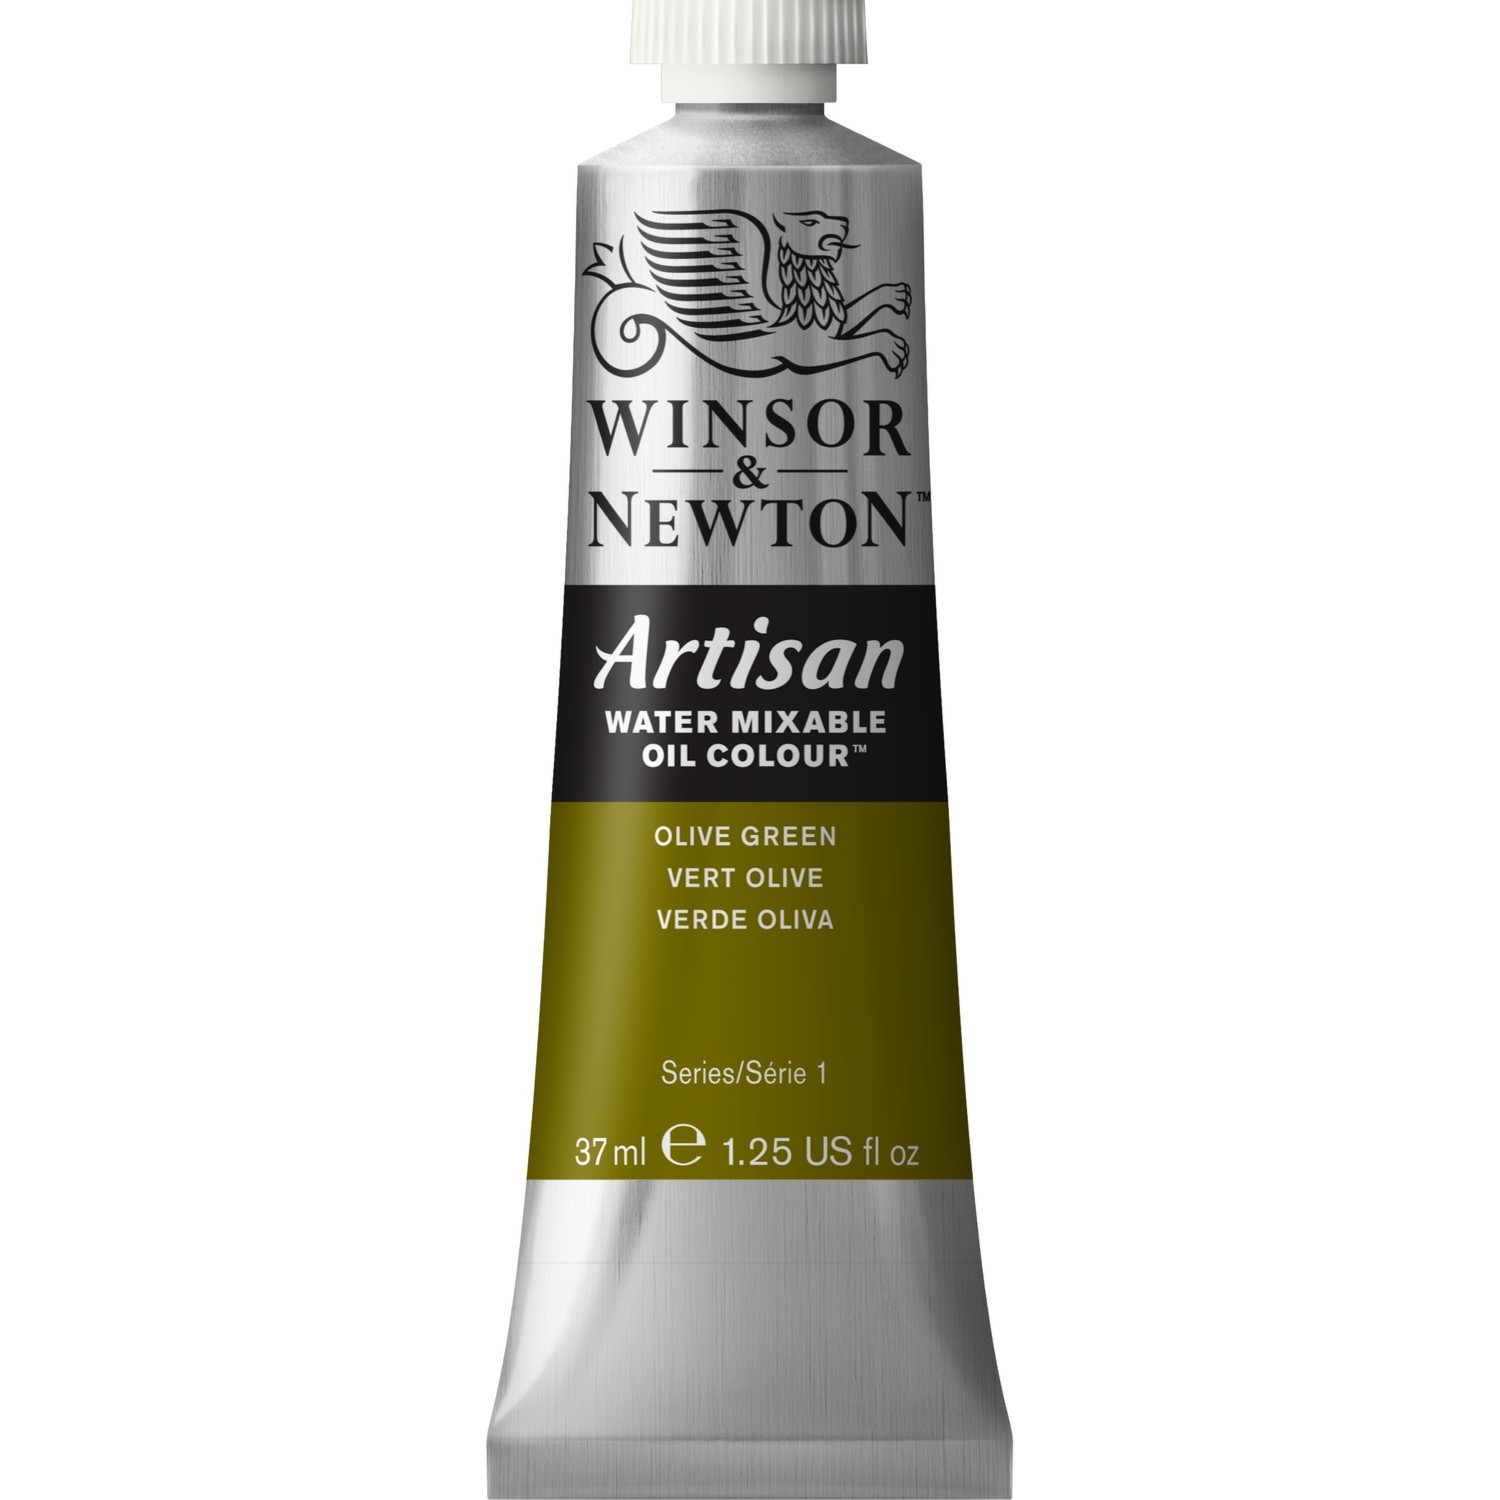 Winsor and Newton 37ml Artisan Mixable Oil Paint - Olive Green Image 1